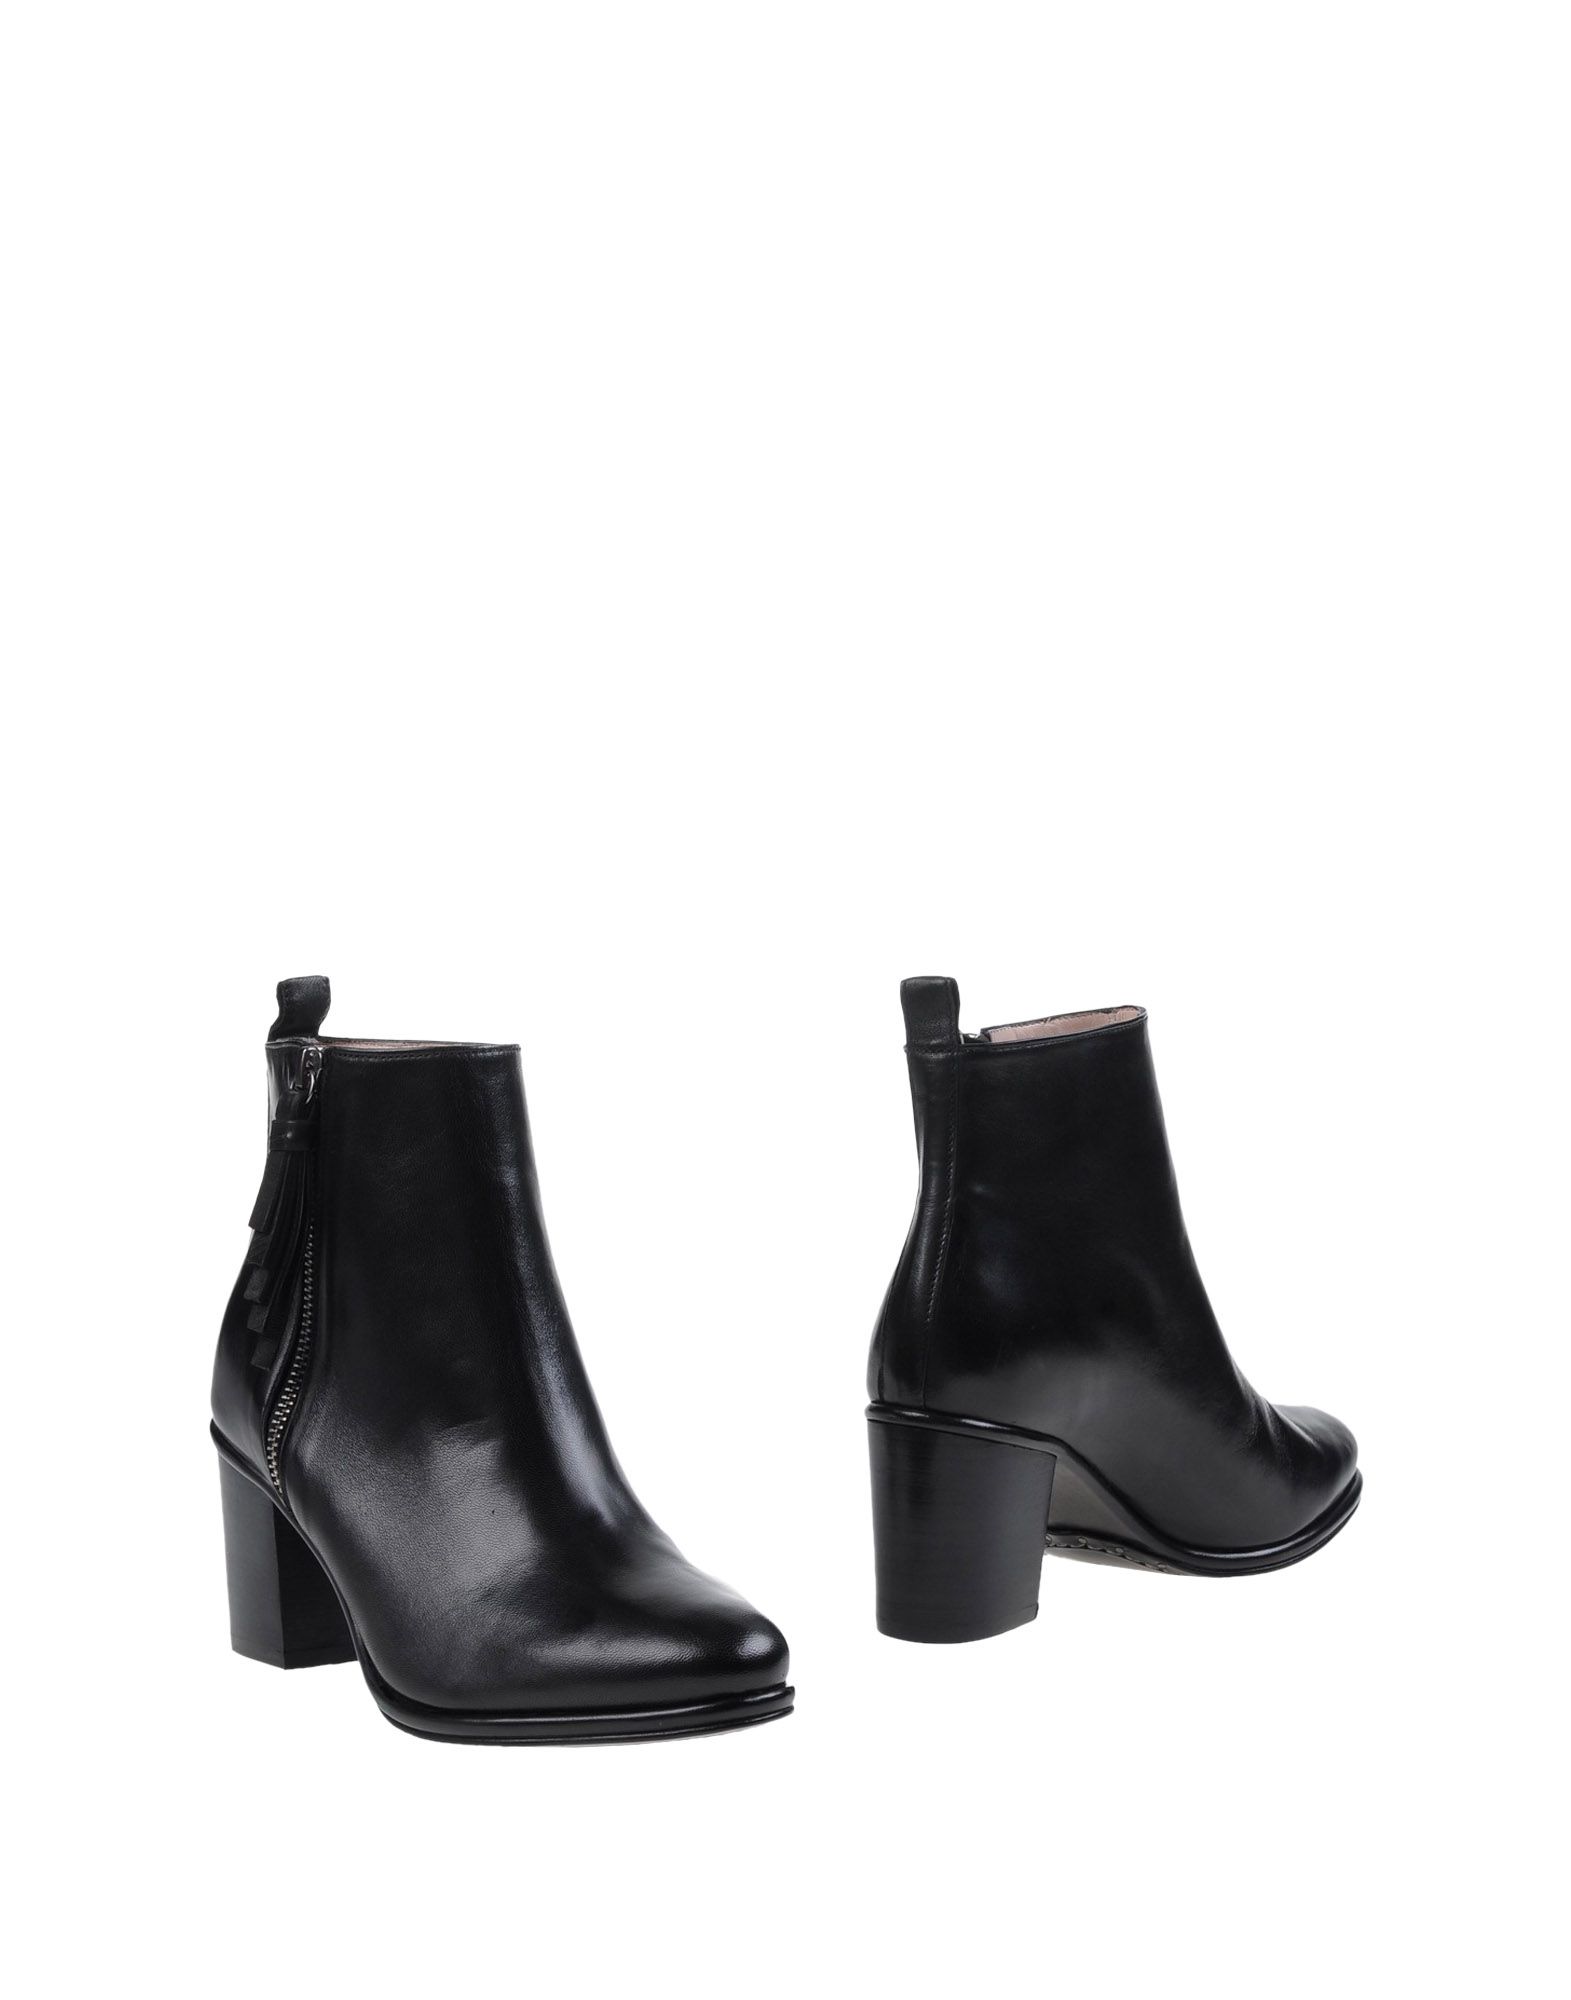 OPENING CEREMONY Ankle boot,11100008TB 11